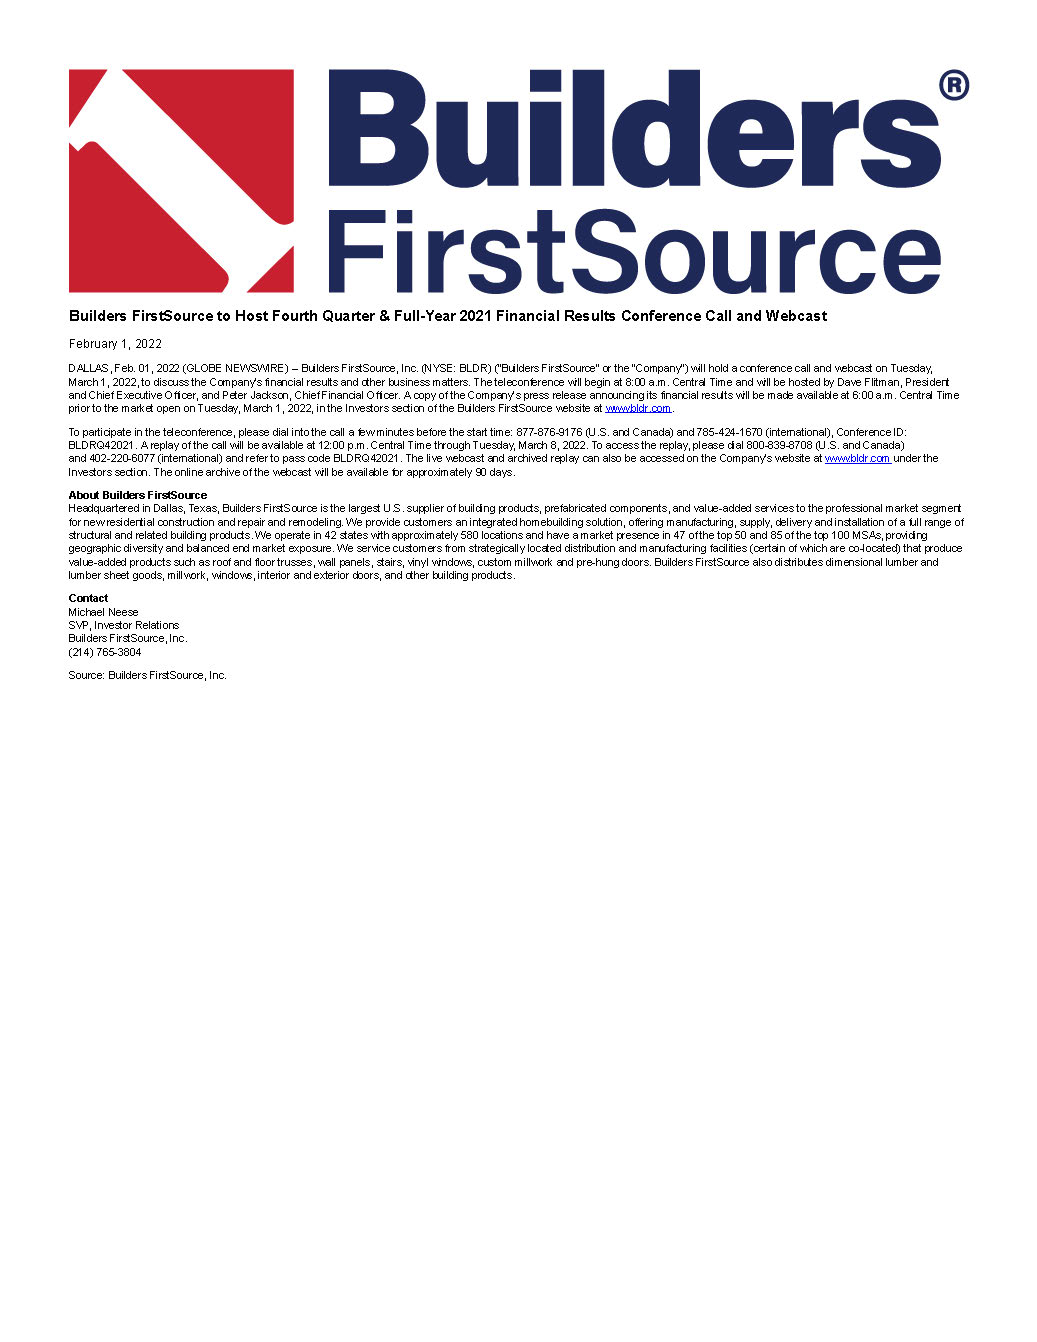 Builders FirstSource to Host Fourth Quarter & Full-Year 2021 Financial Results Conference Call and Webcast